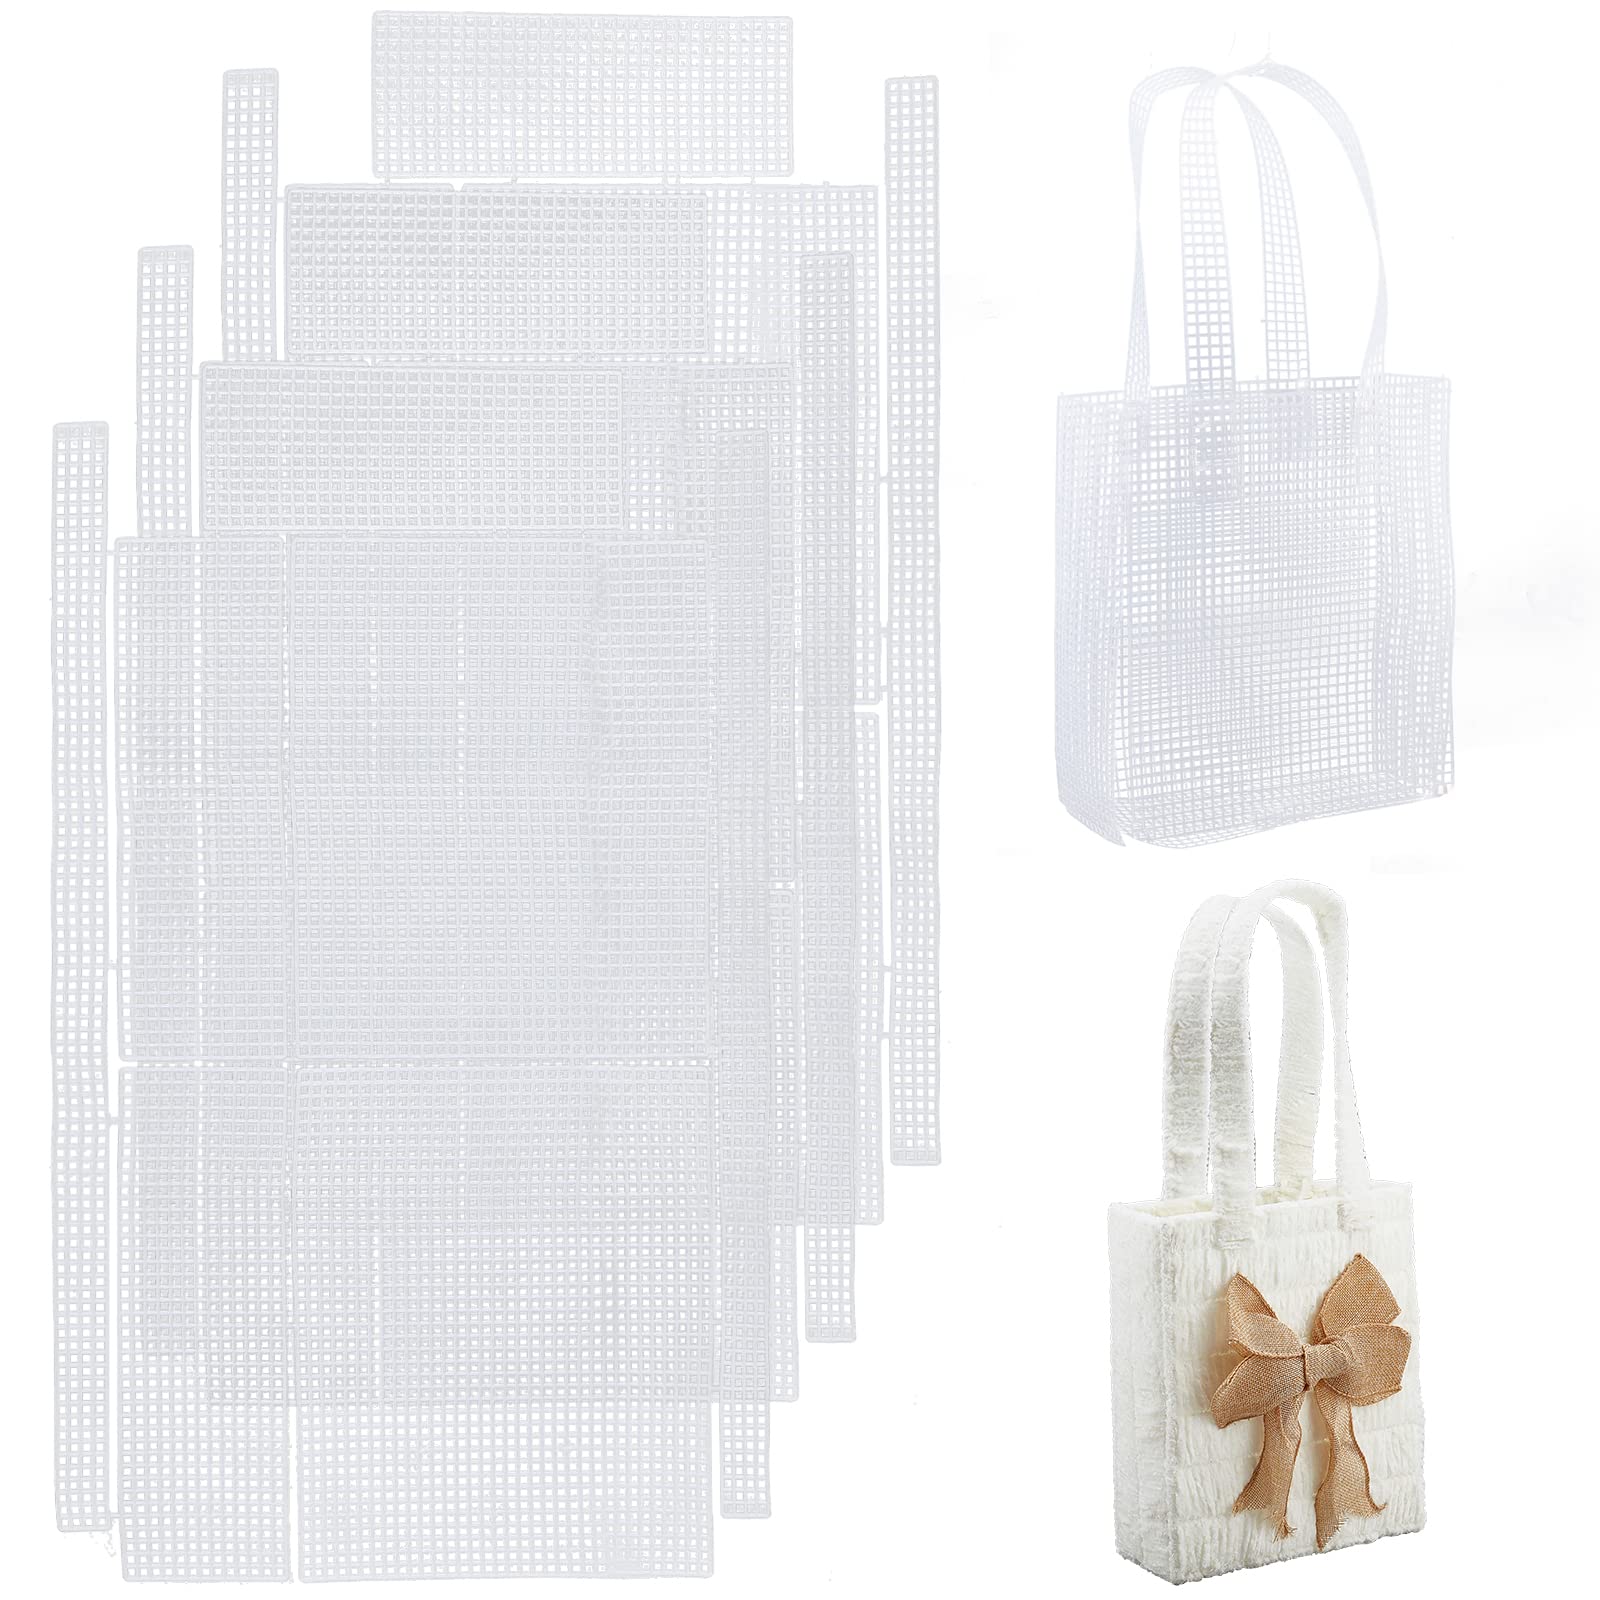 Maydear White Canvas Bag Embroidery Kit with pre-Printed Pattern